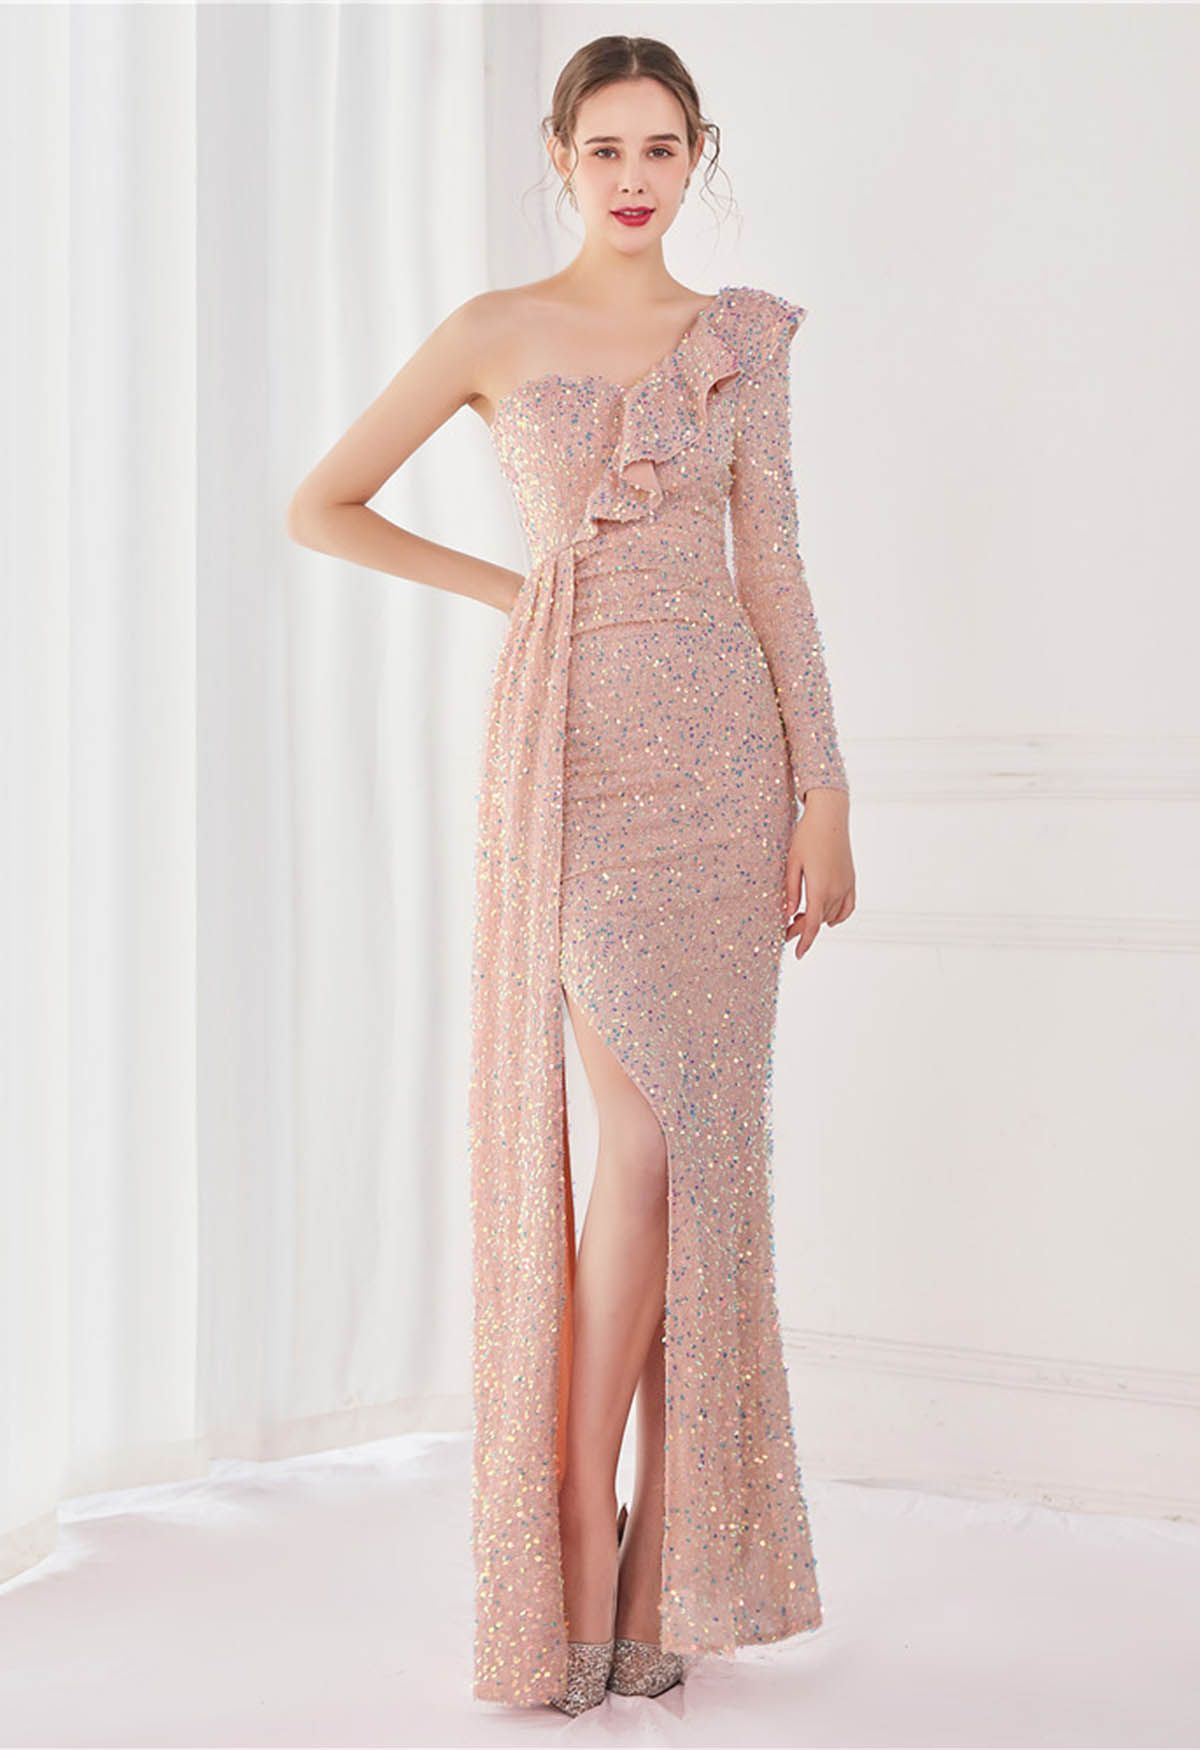 One-Shoulder Sequined Ruffle Slit Maxi Gown in Pink